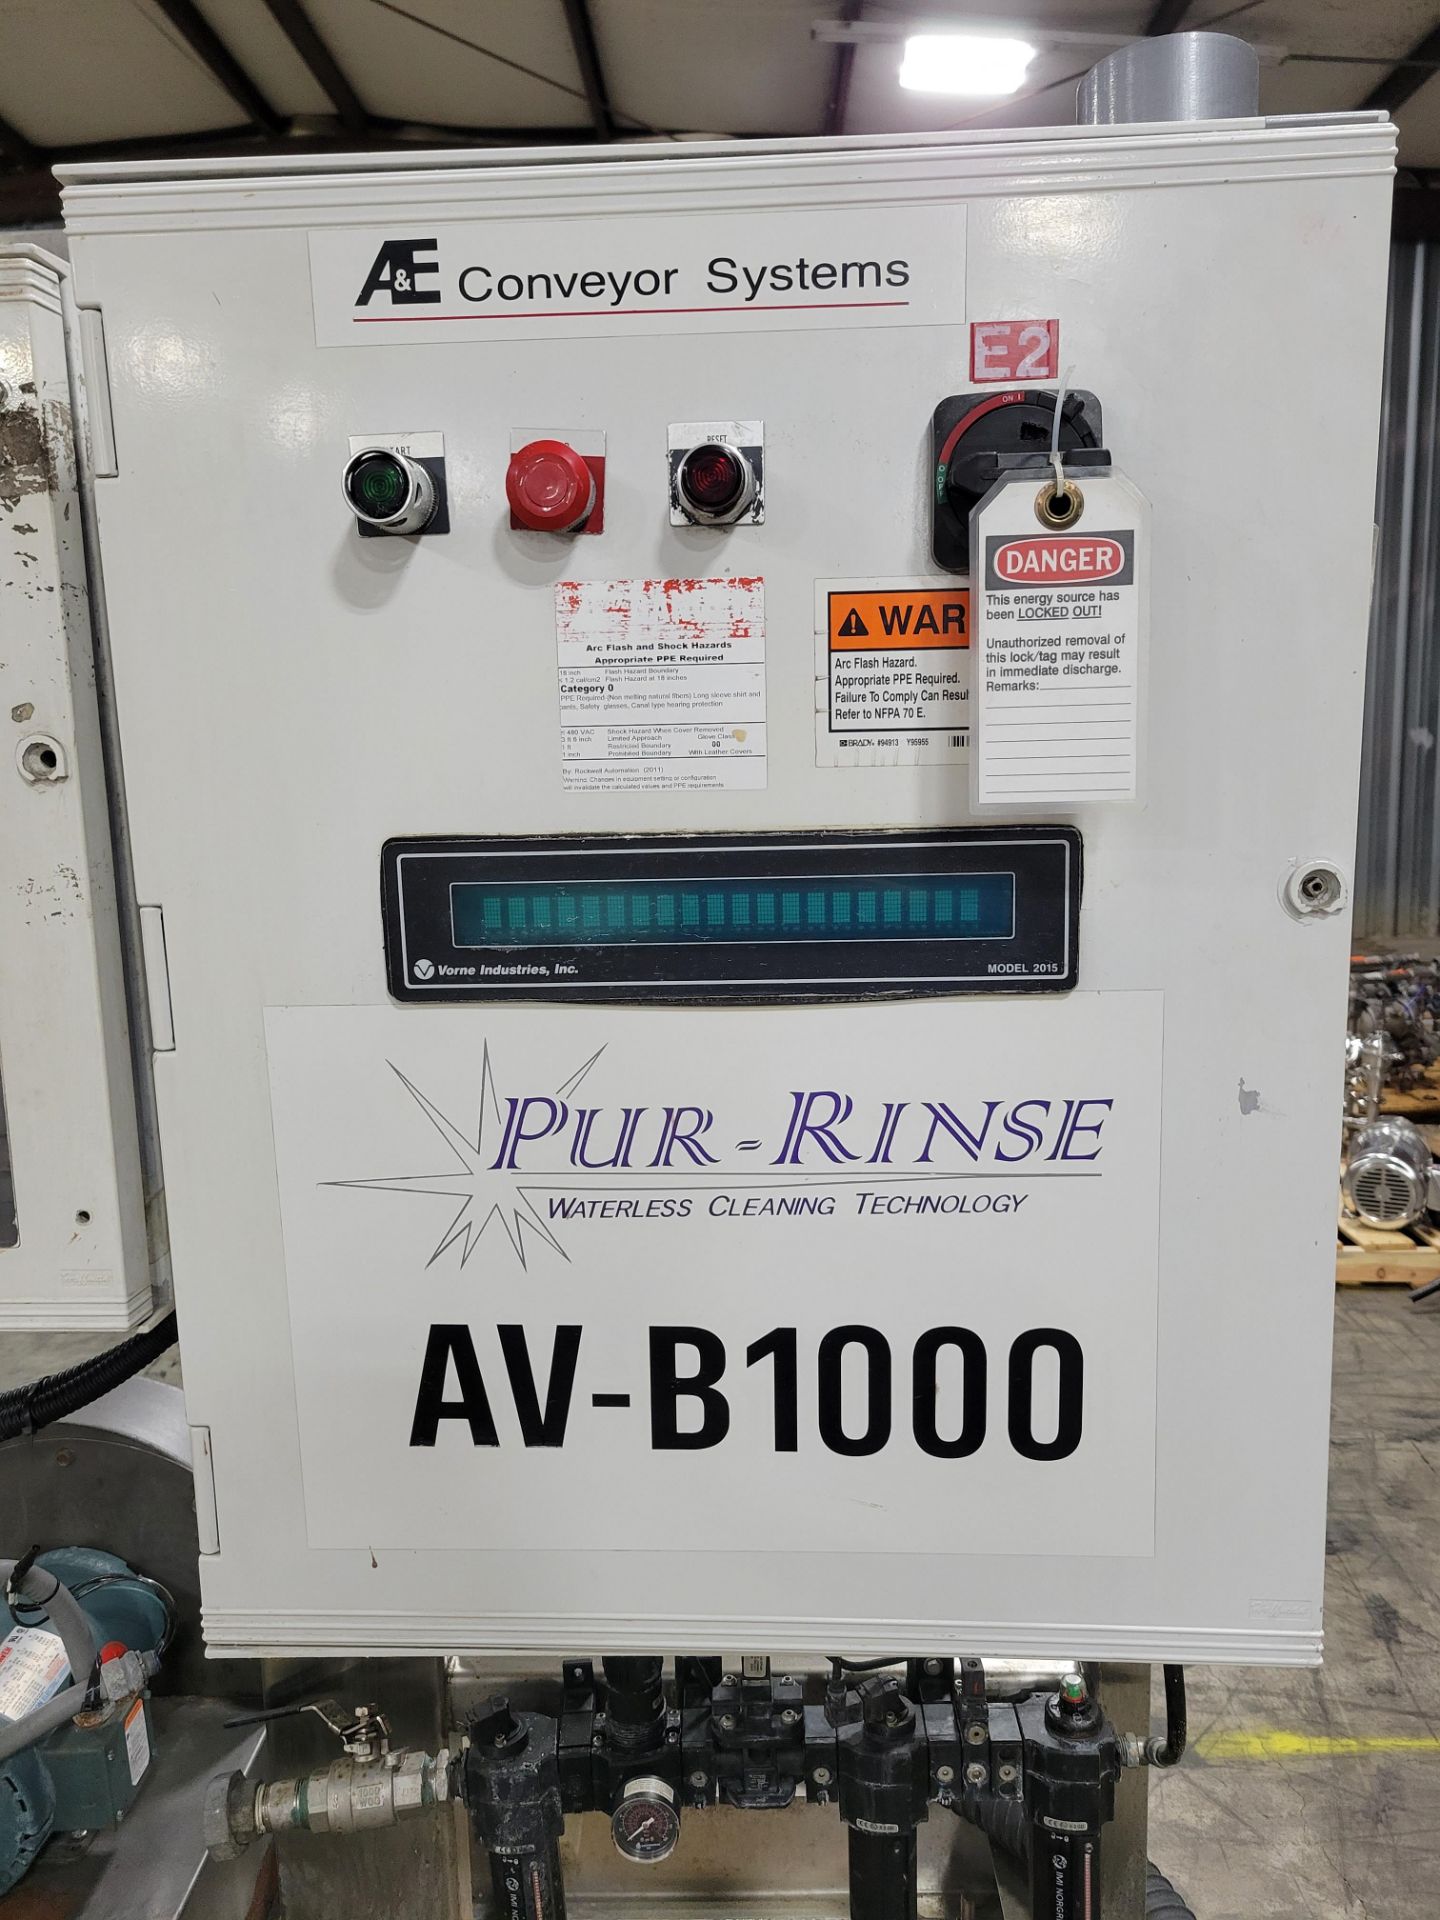 A&E Conveyor Systems Pur-Rinse Air Rinser - Image 2 of 11